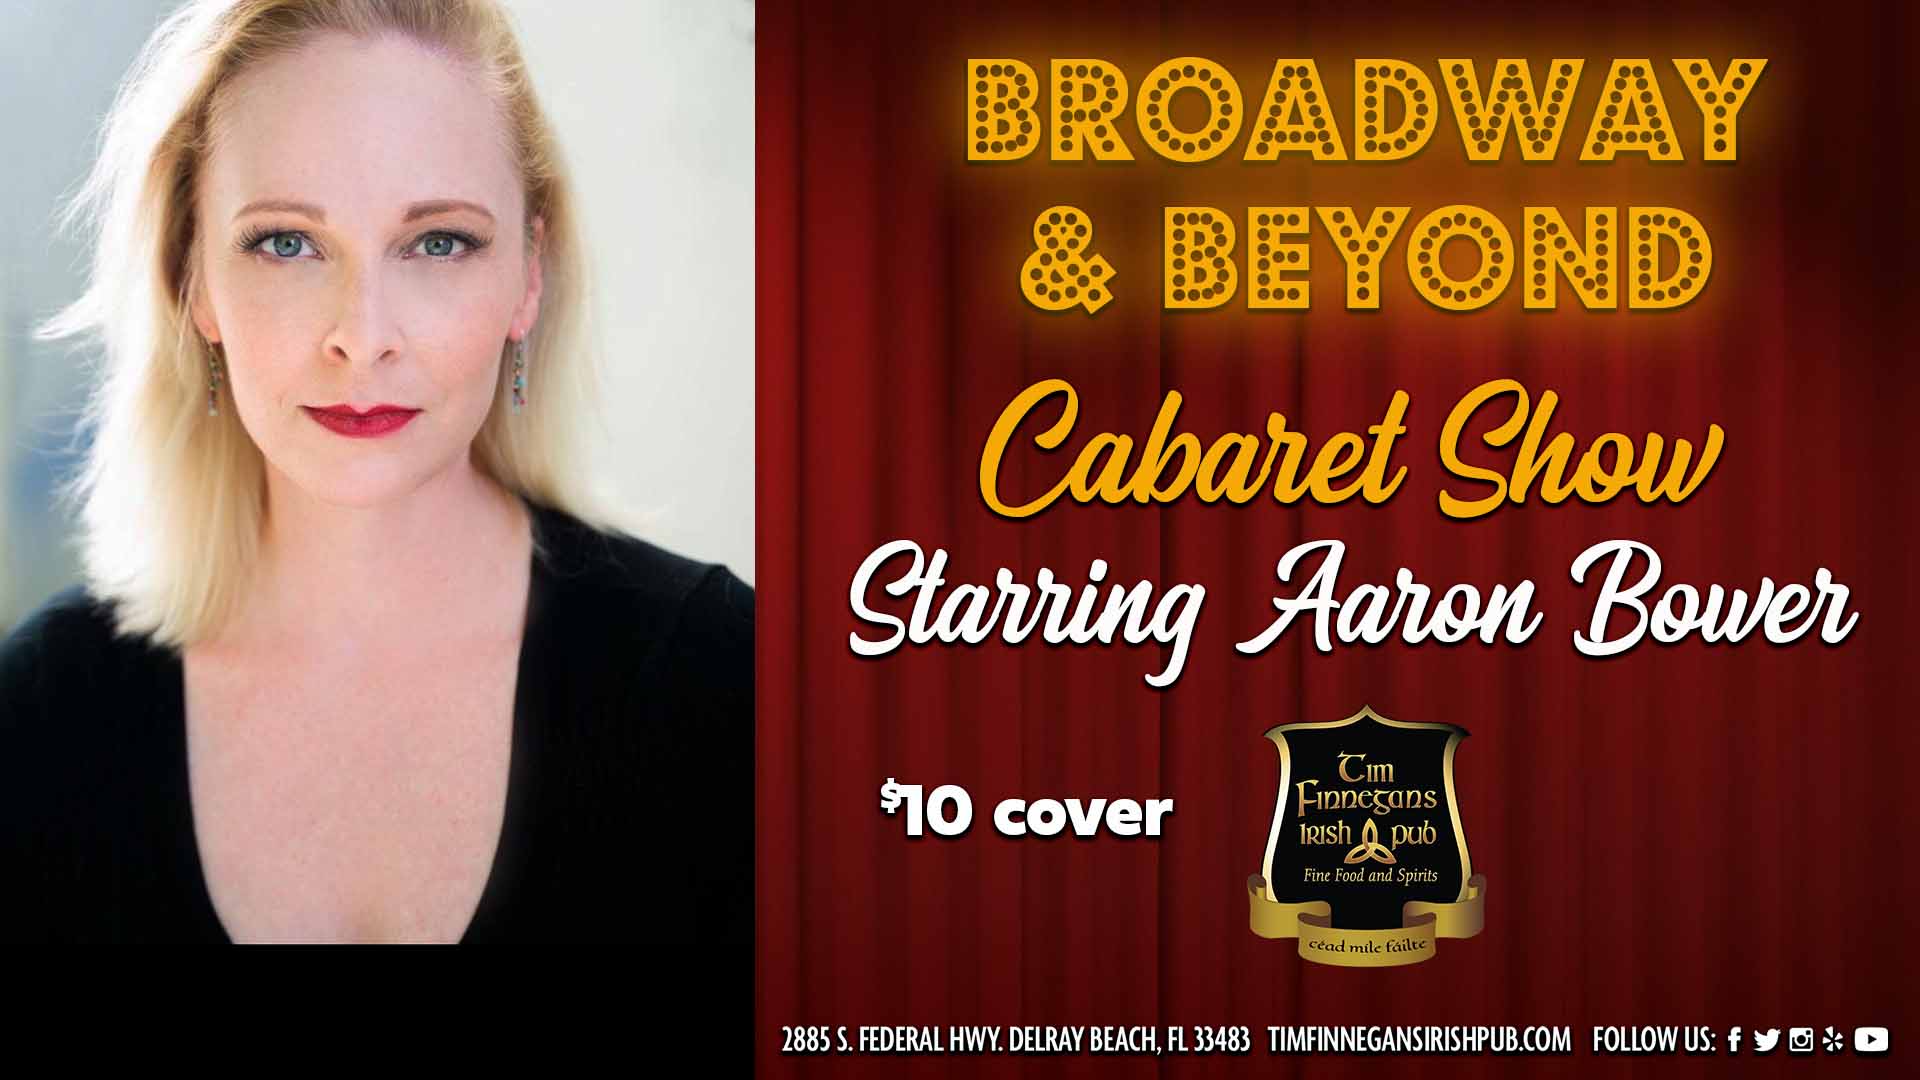 “Broadway & Beyond Cabaret Show” Starring Aaron Bower December 19th 7pm $10 cover